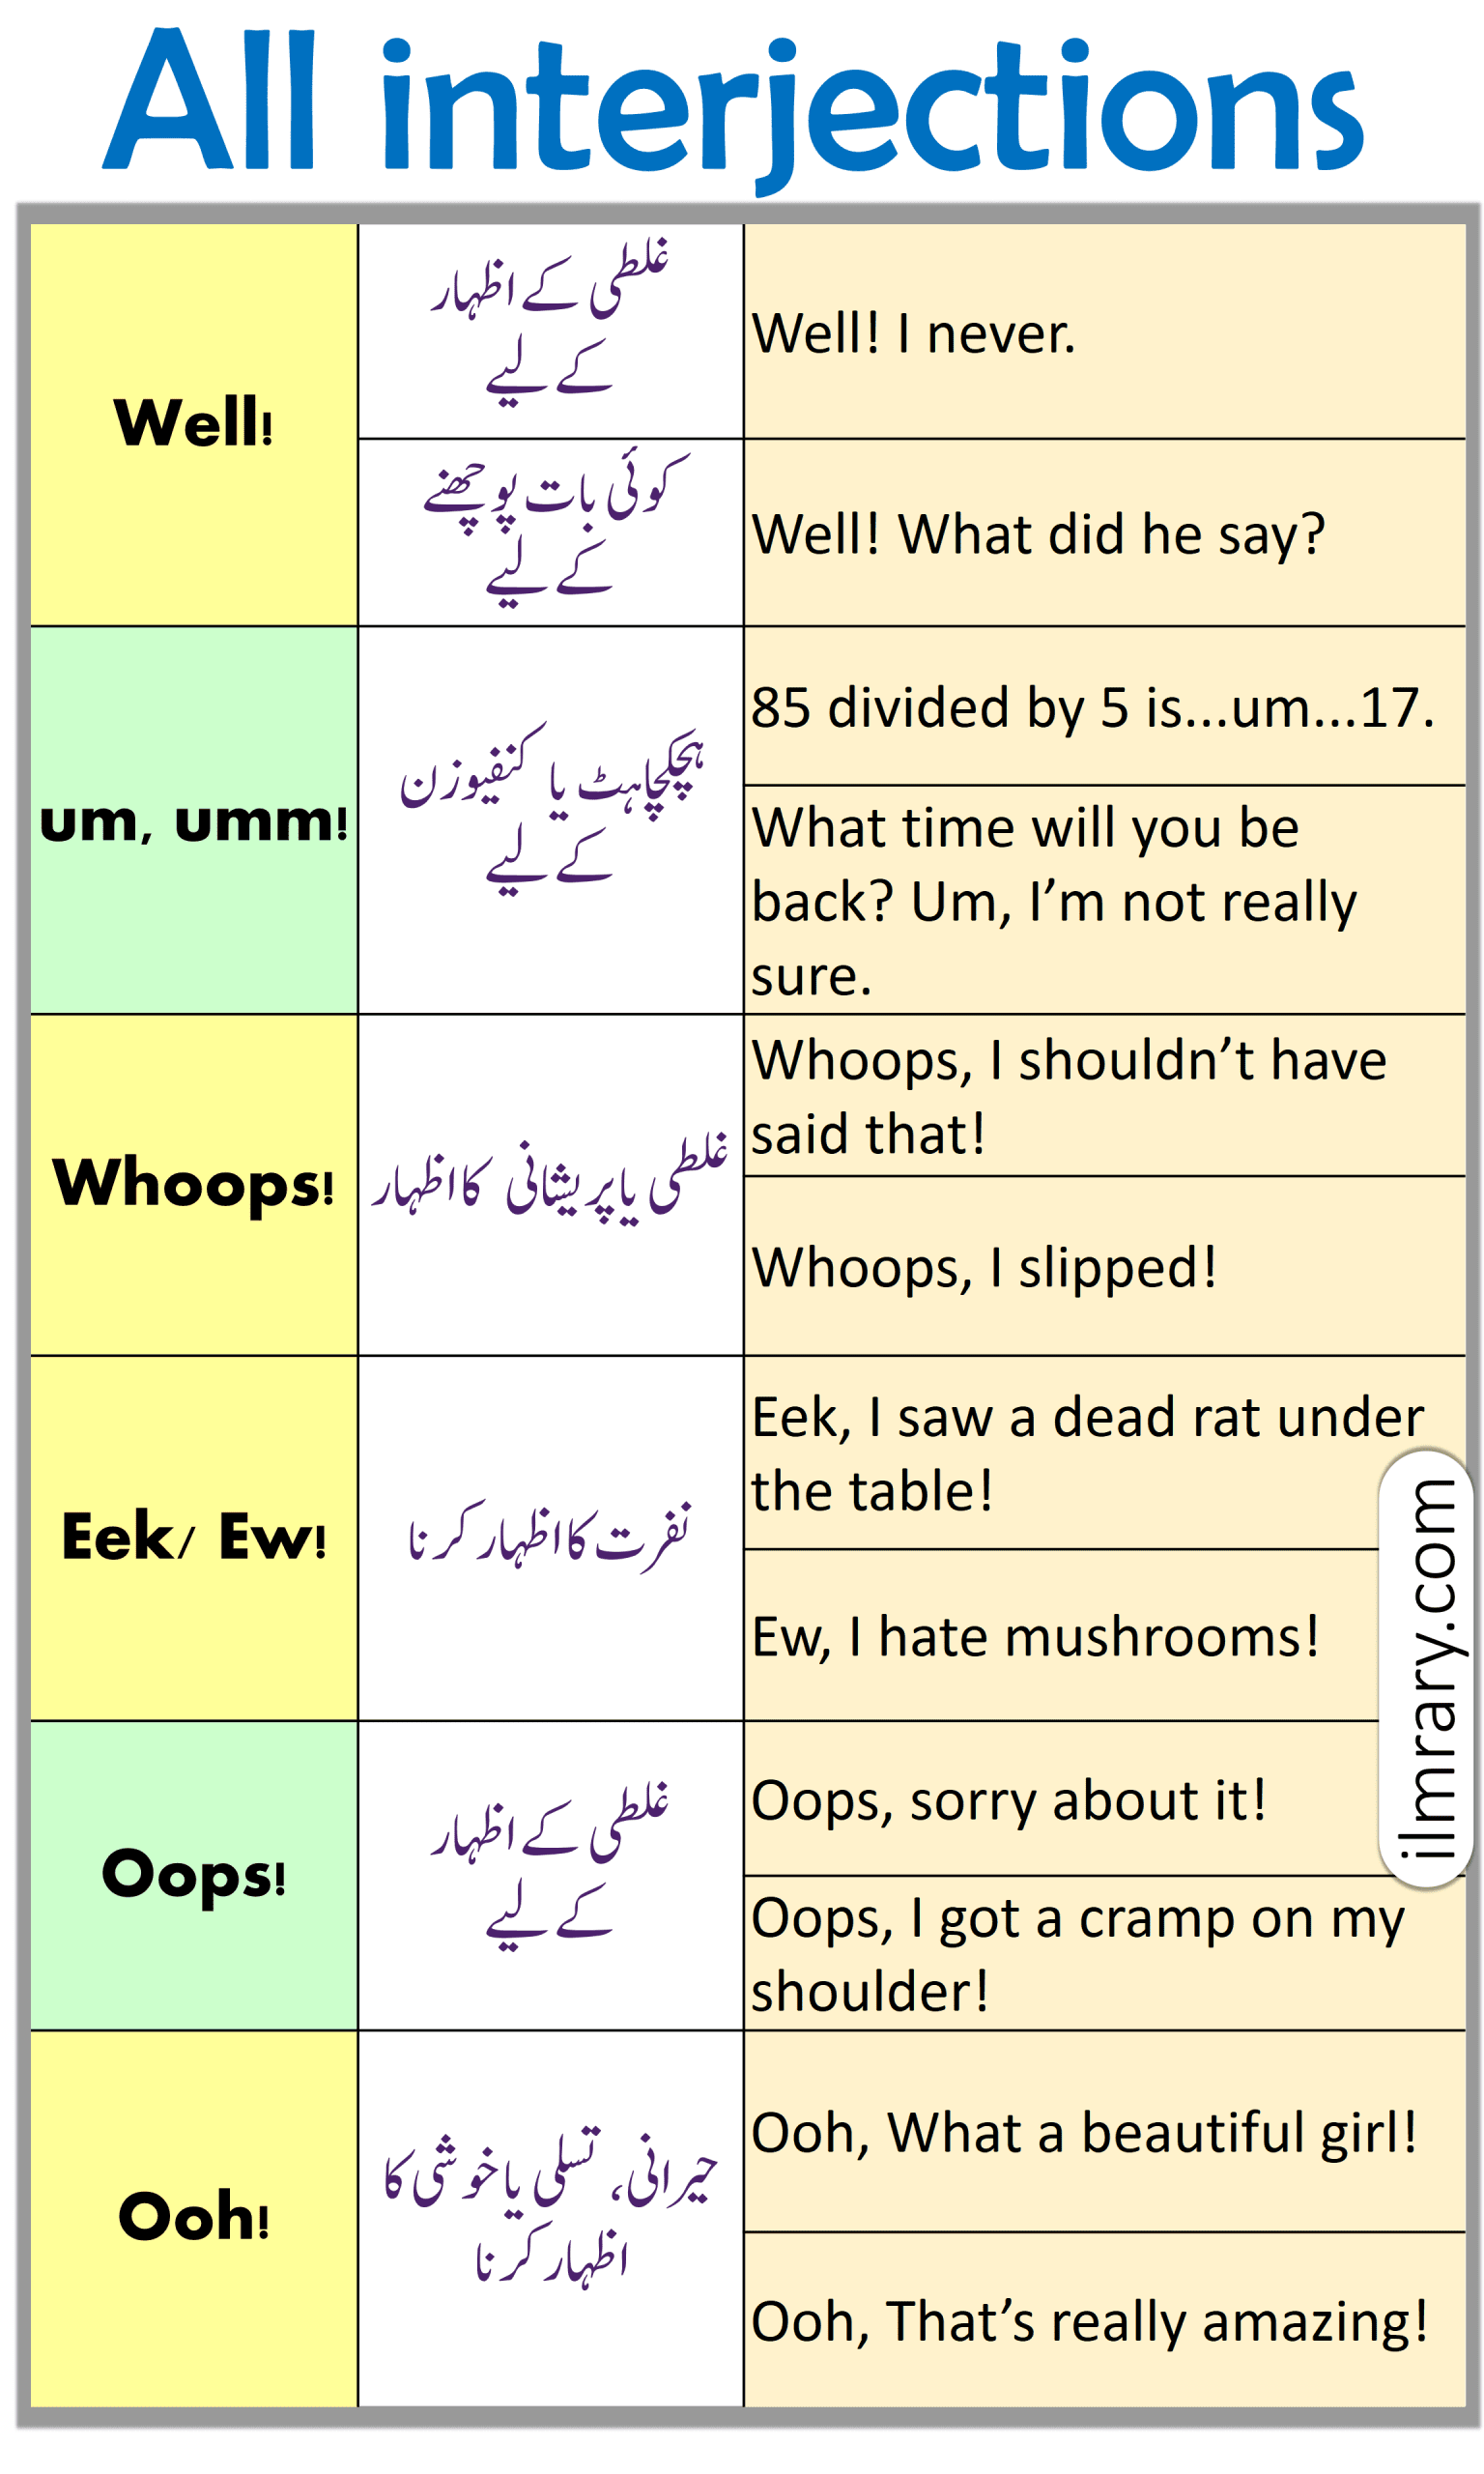 List of All Interjections in English with Urdu Translation